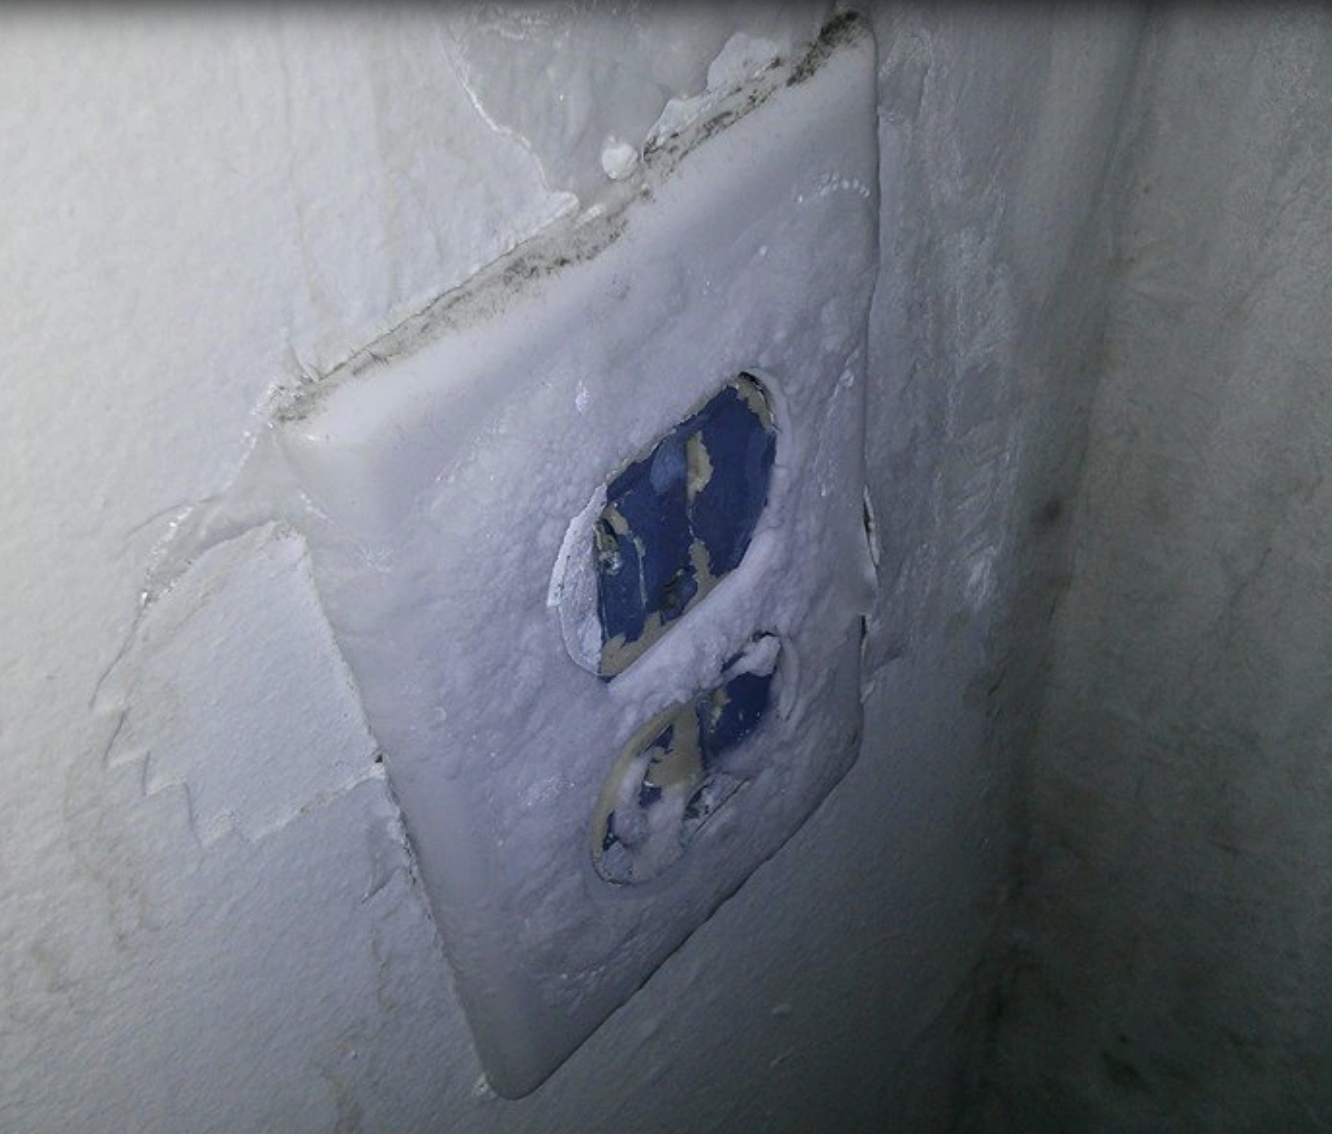 An outlet covered in ice